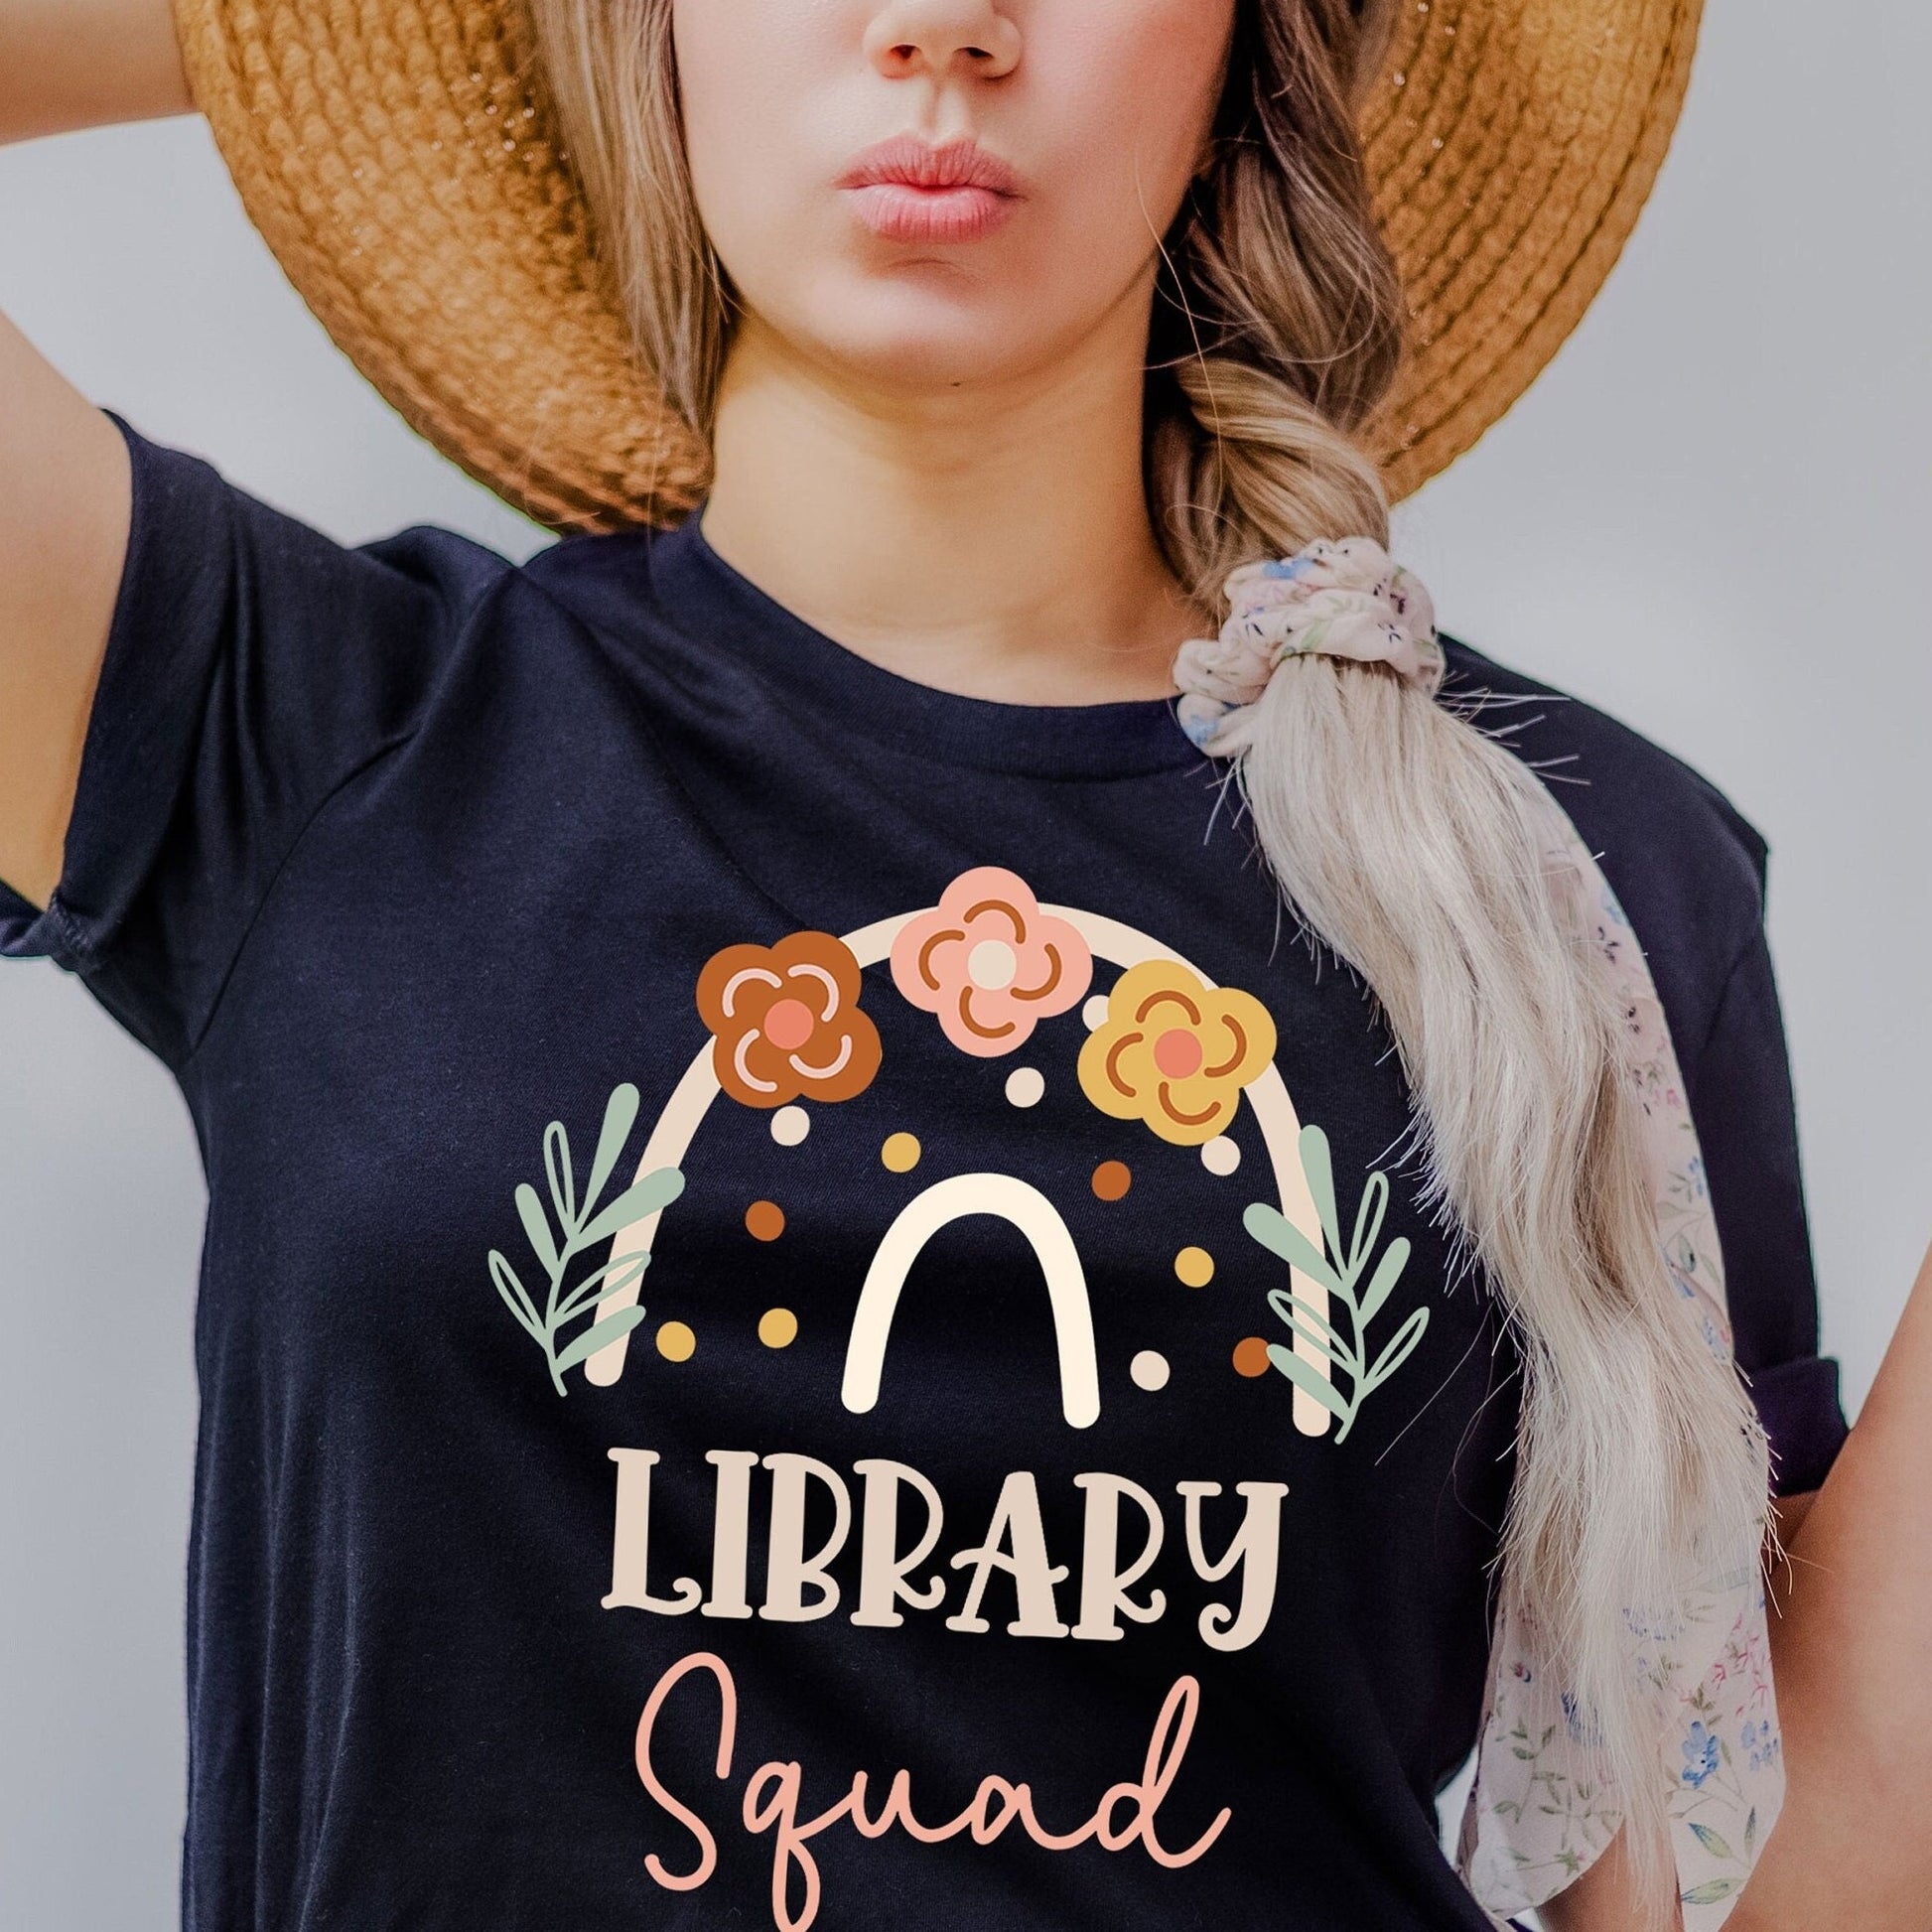 Librarian Shirt, School Library Squad, Library Shirt, Librarian Shirts for Women, Reading Teacher Shirt Rainbow Reading Coach Specialist Tee